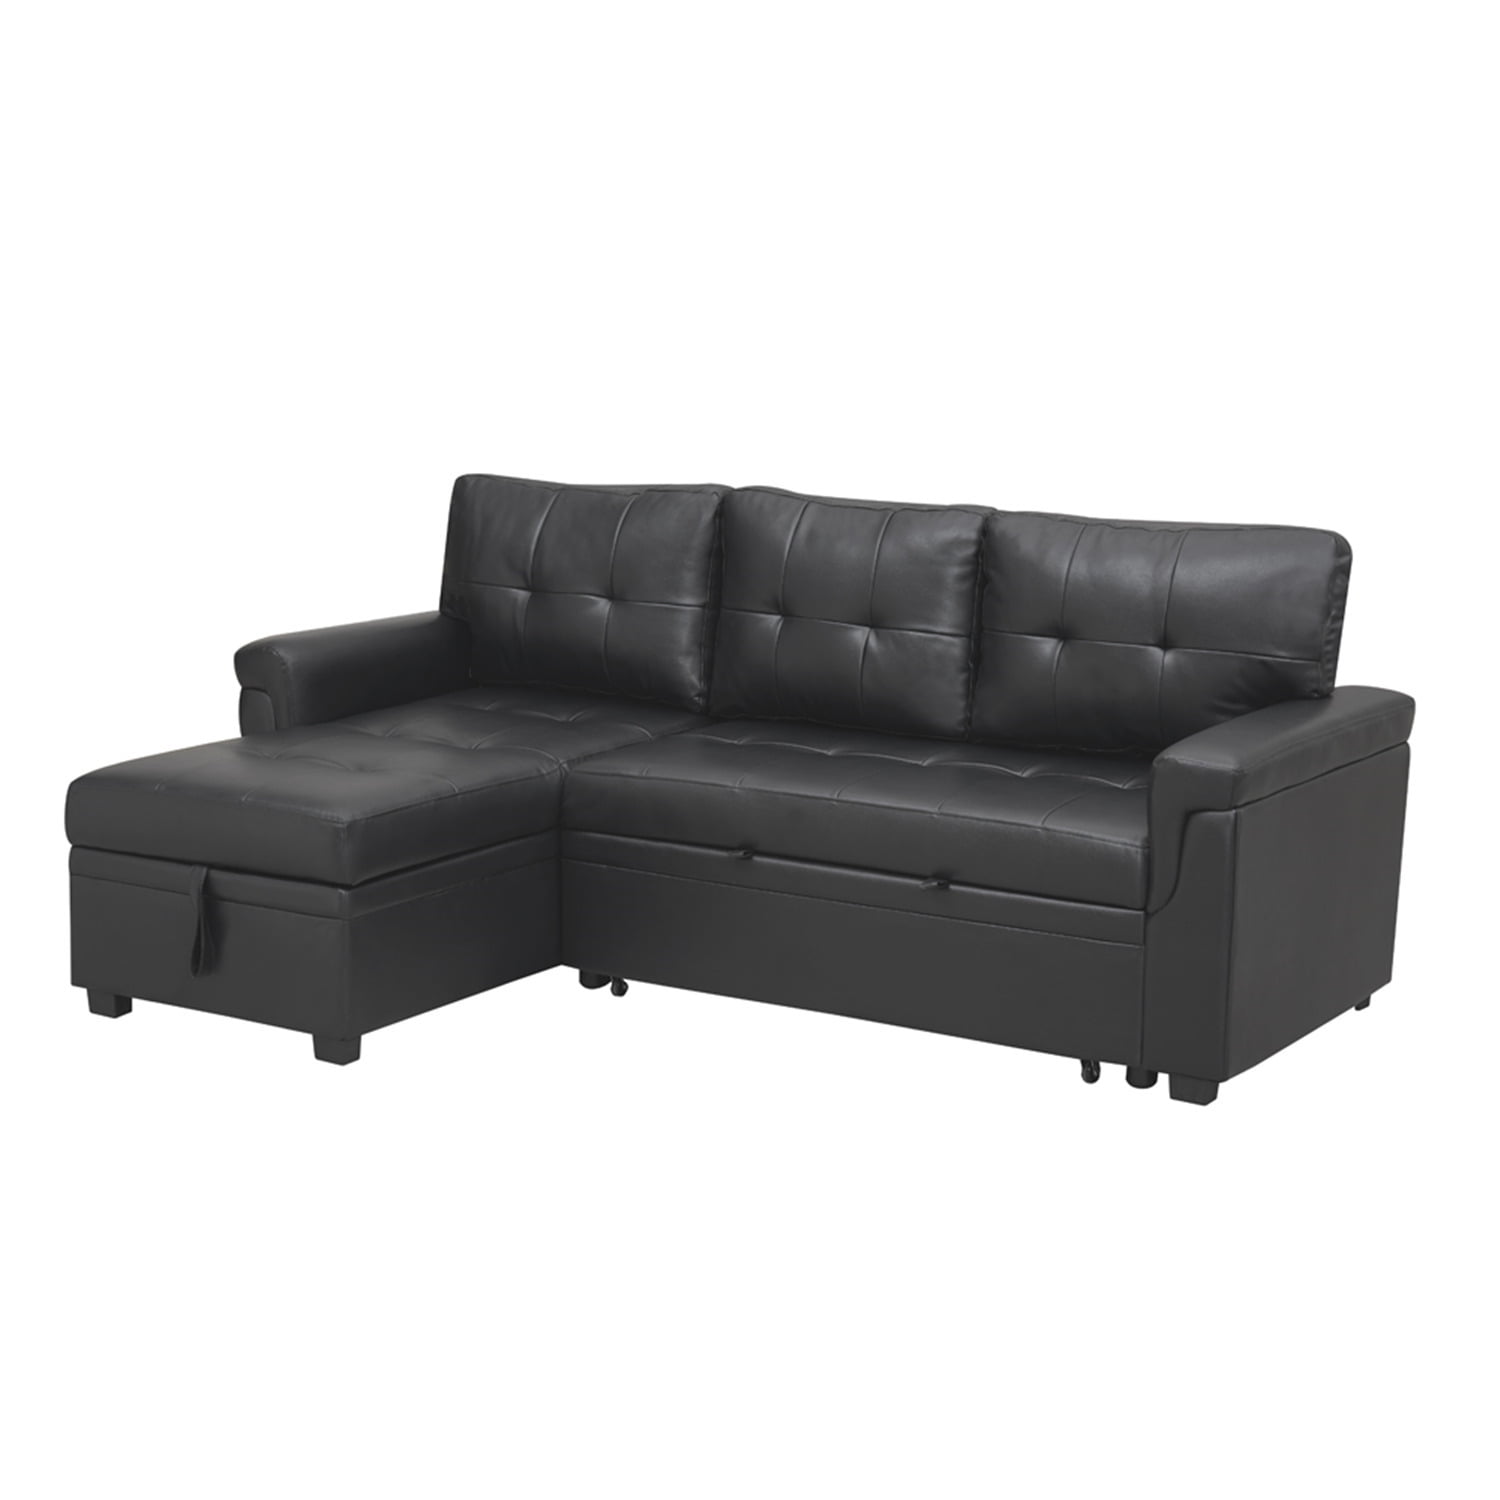 Naomi Home Perry Sectional Sleeper Sofa - Convertible Pull-Out Bed ...